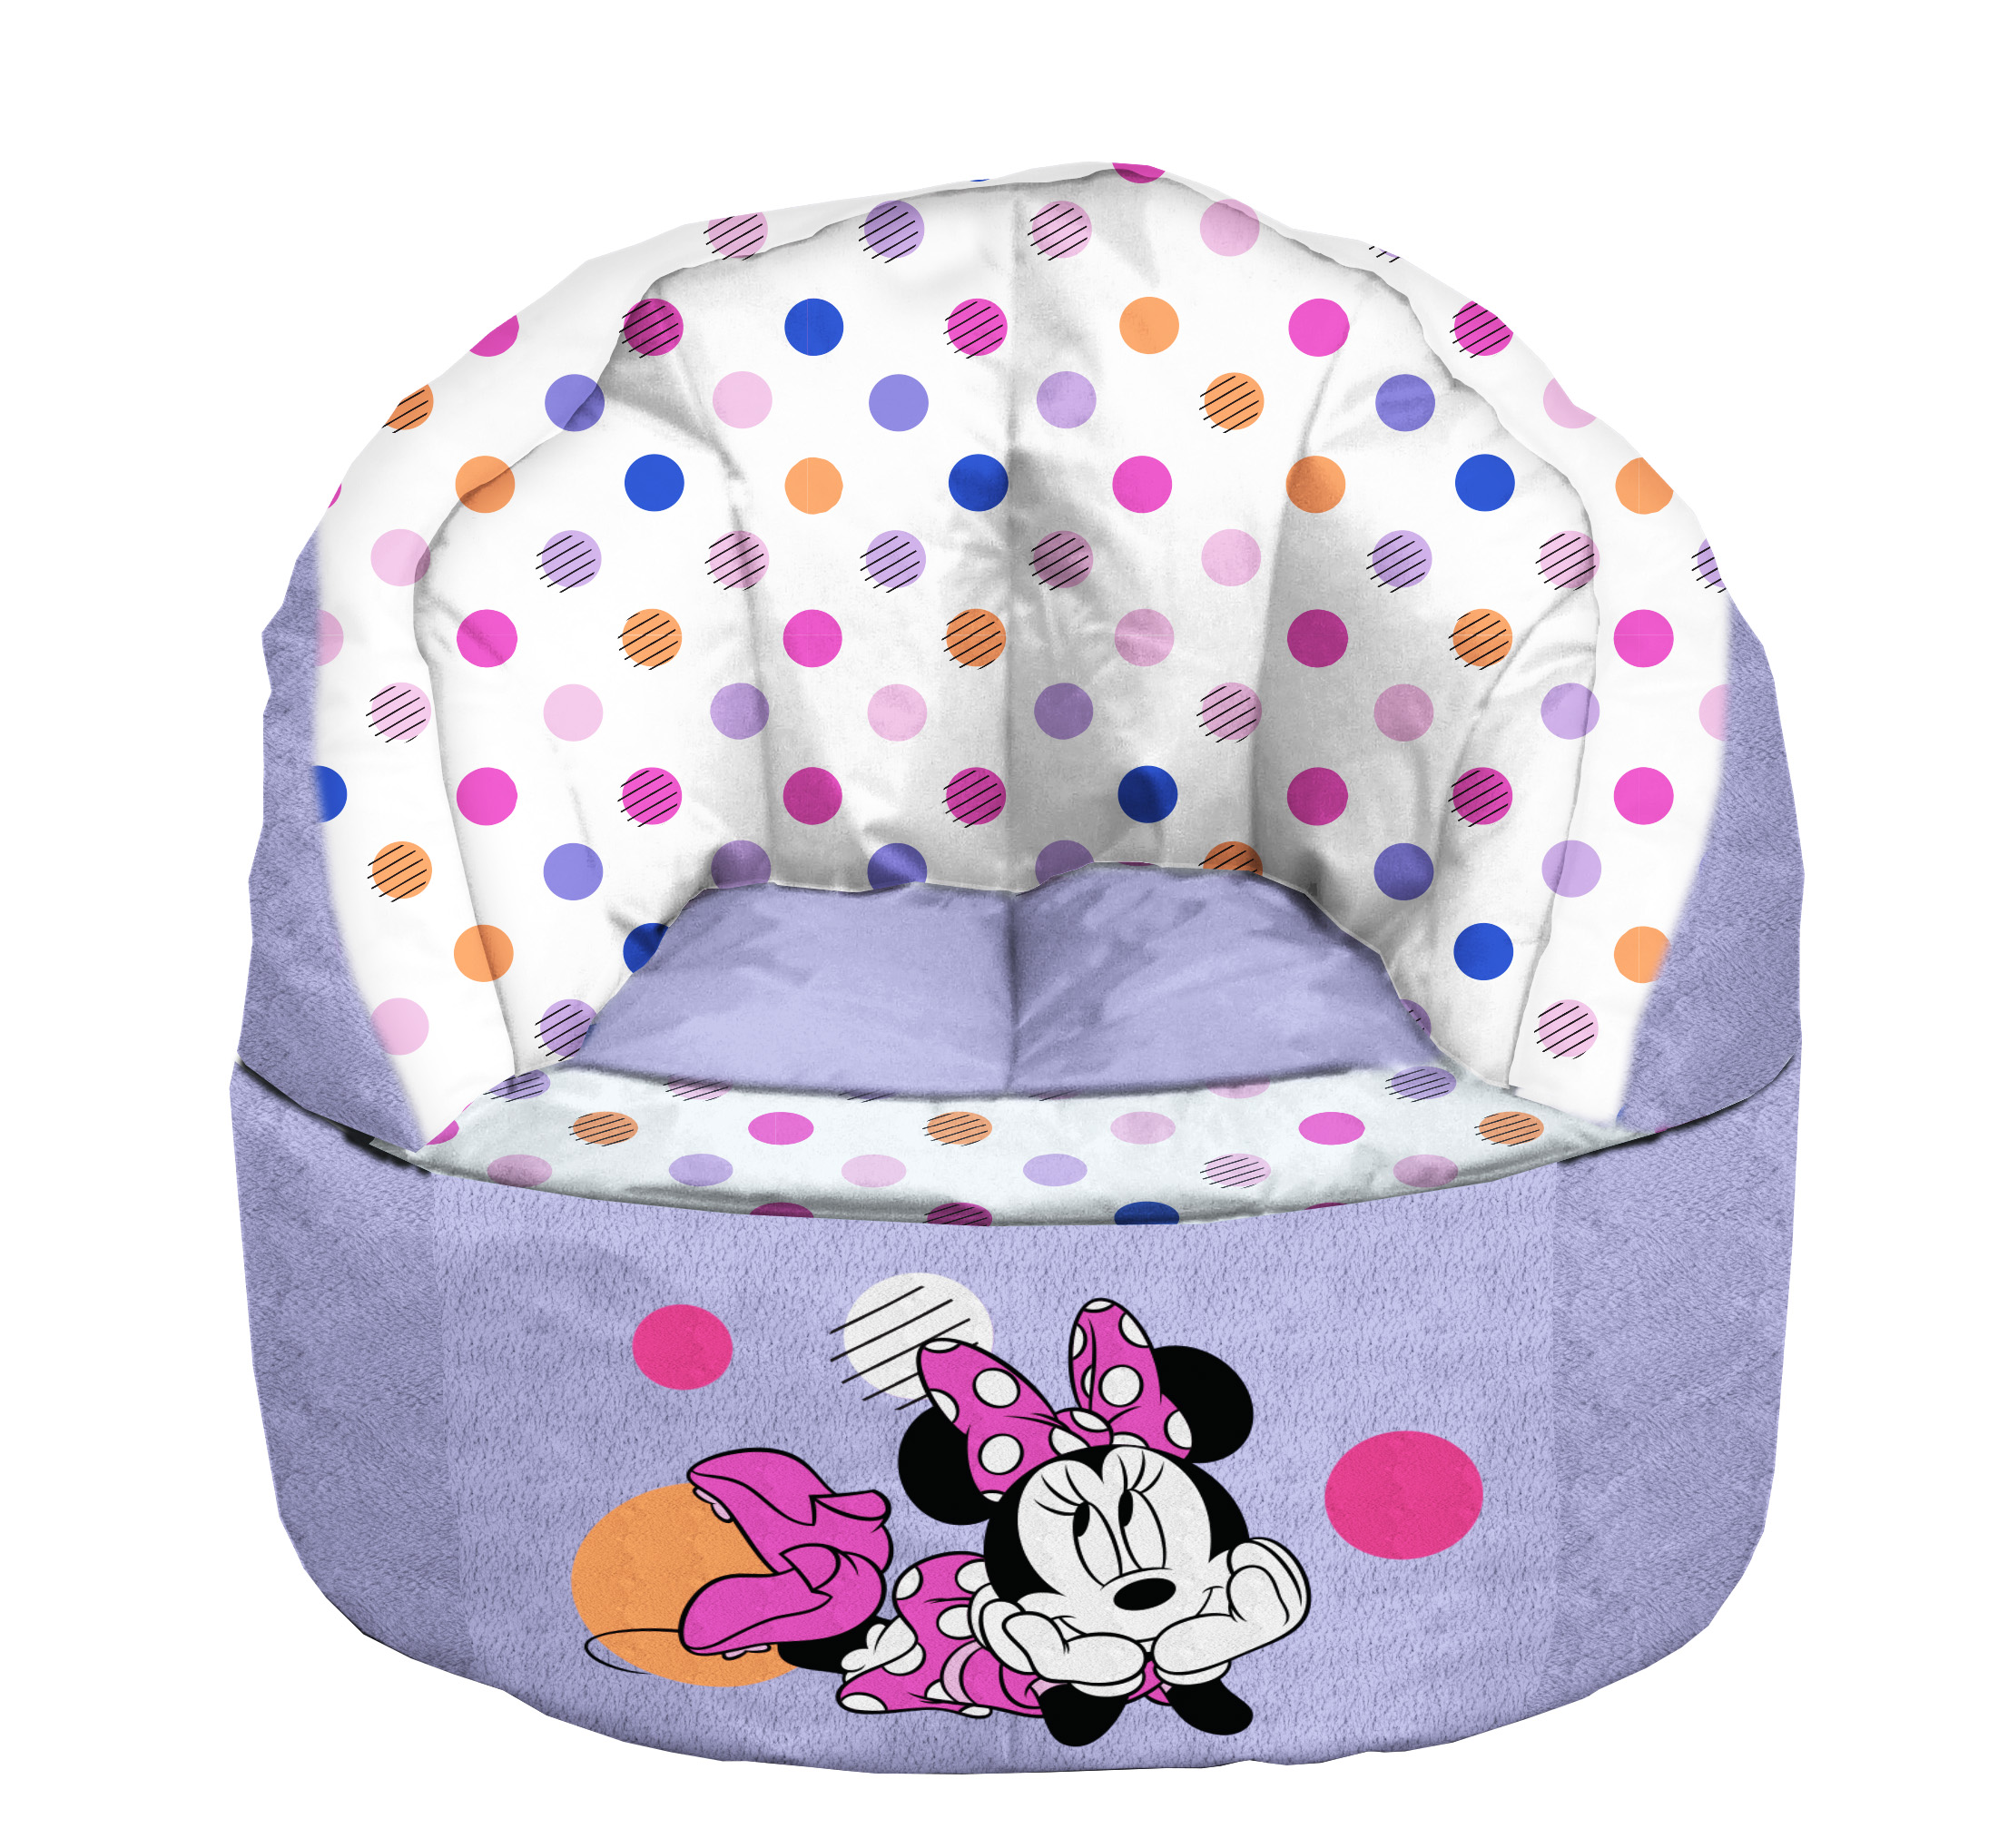 Disney Minnie Mouse Purple Polyester Bean Bag Chair - image 1 of 8